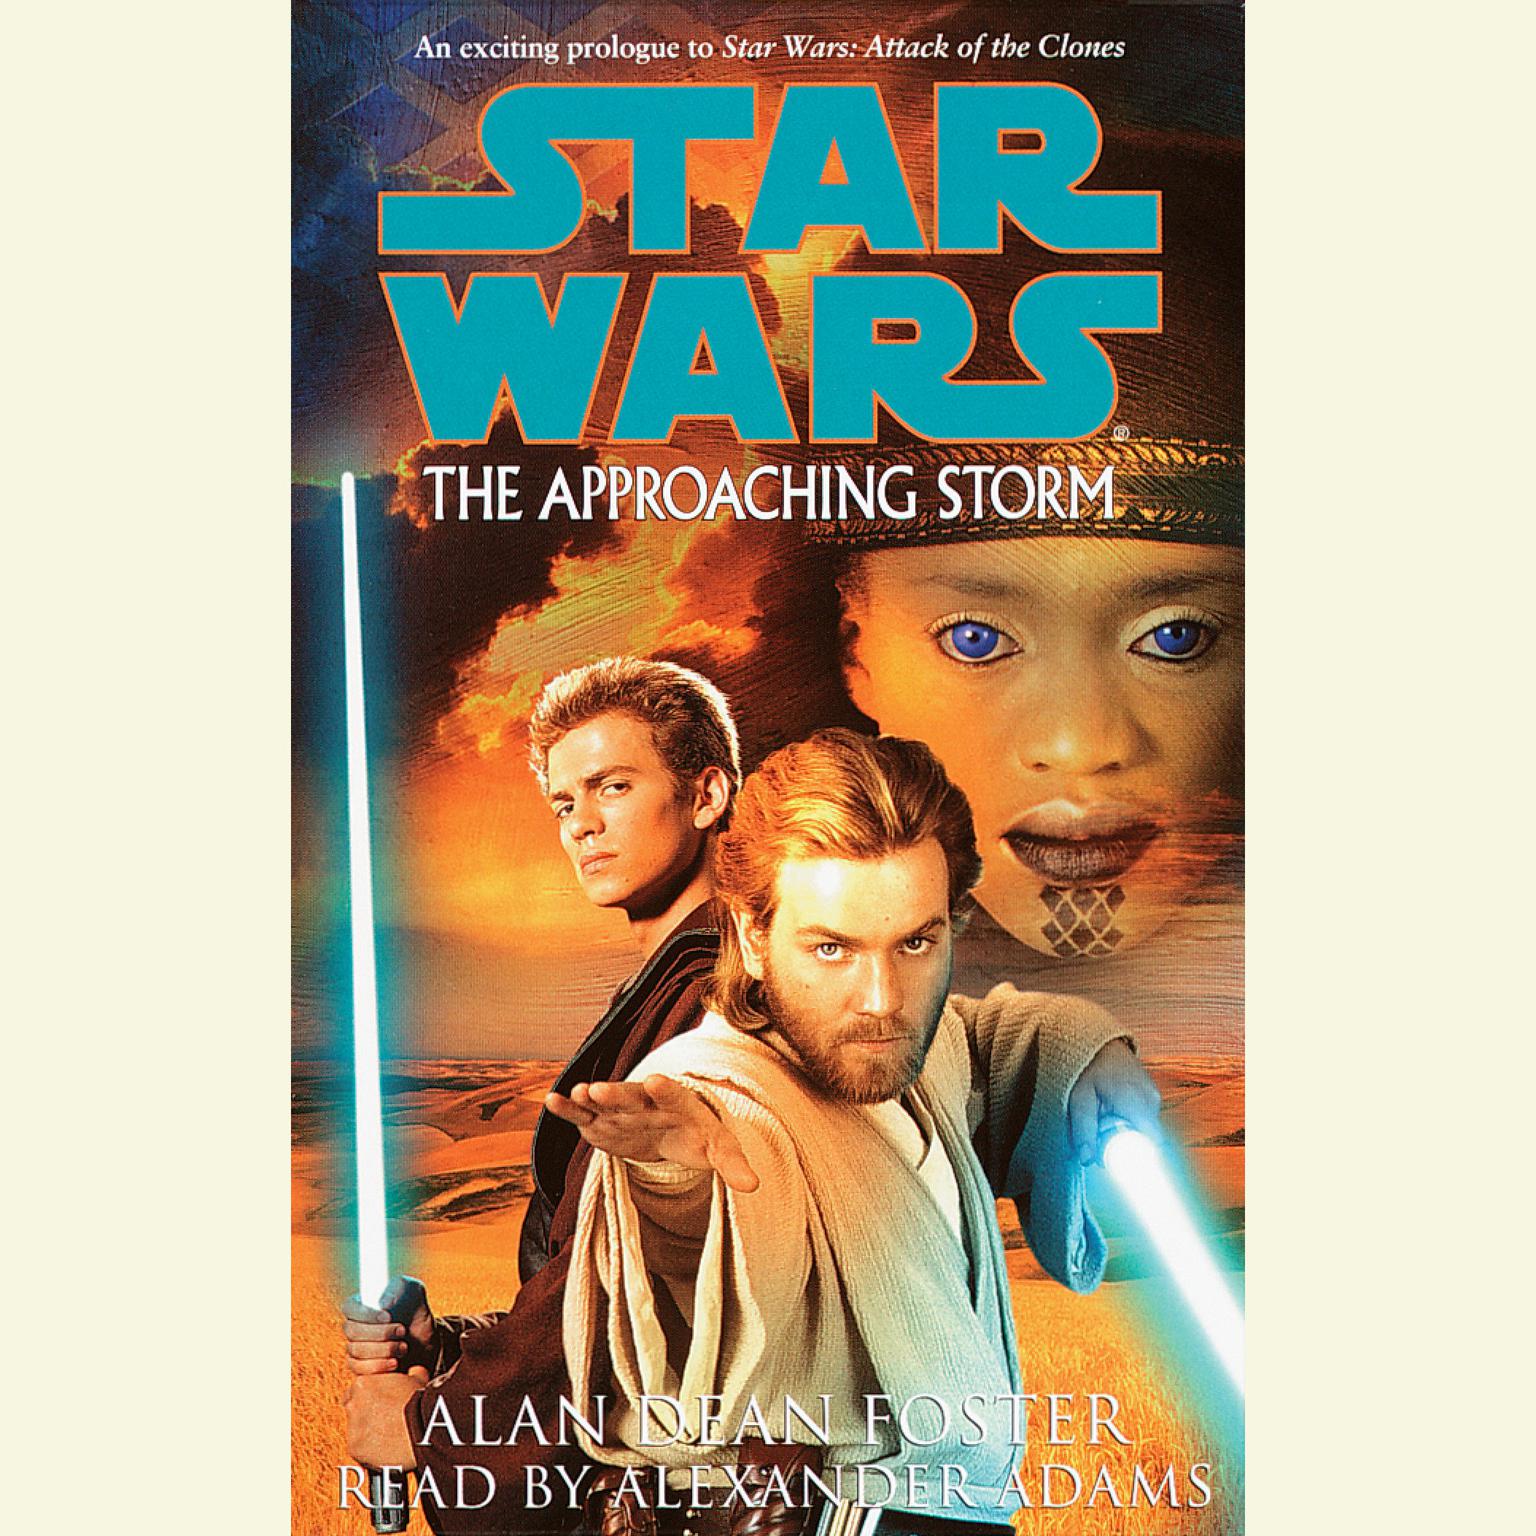 Star Wars: The Approaching Storm (Abridged) Audiobook, by Alan Dean Foster